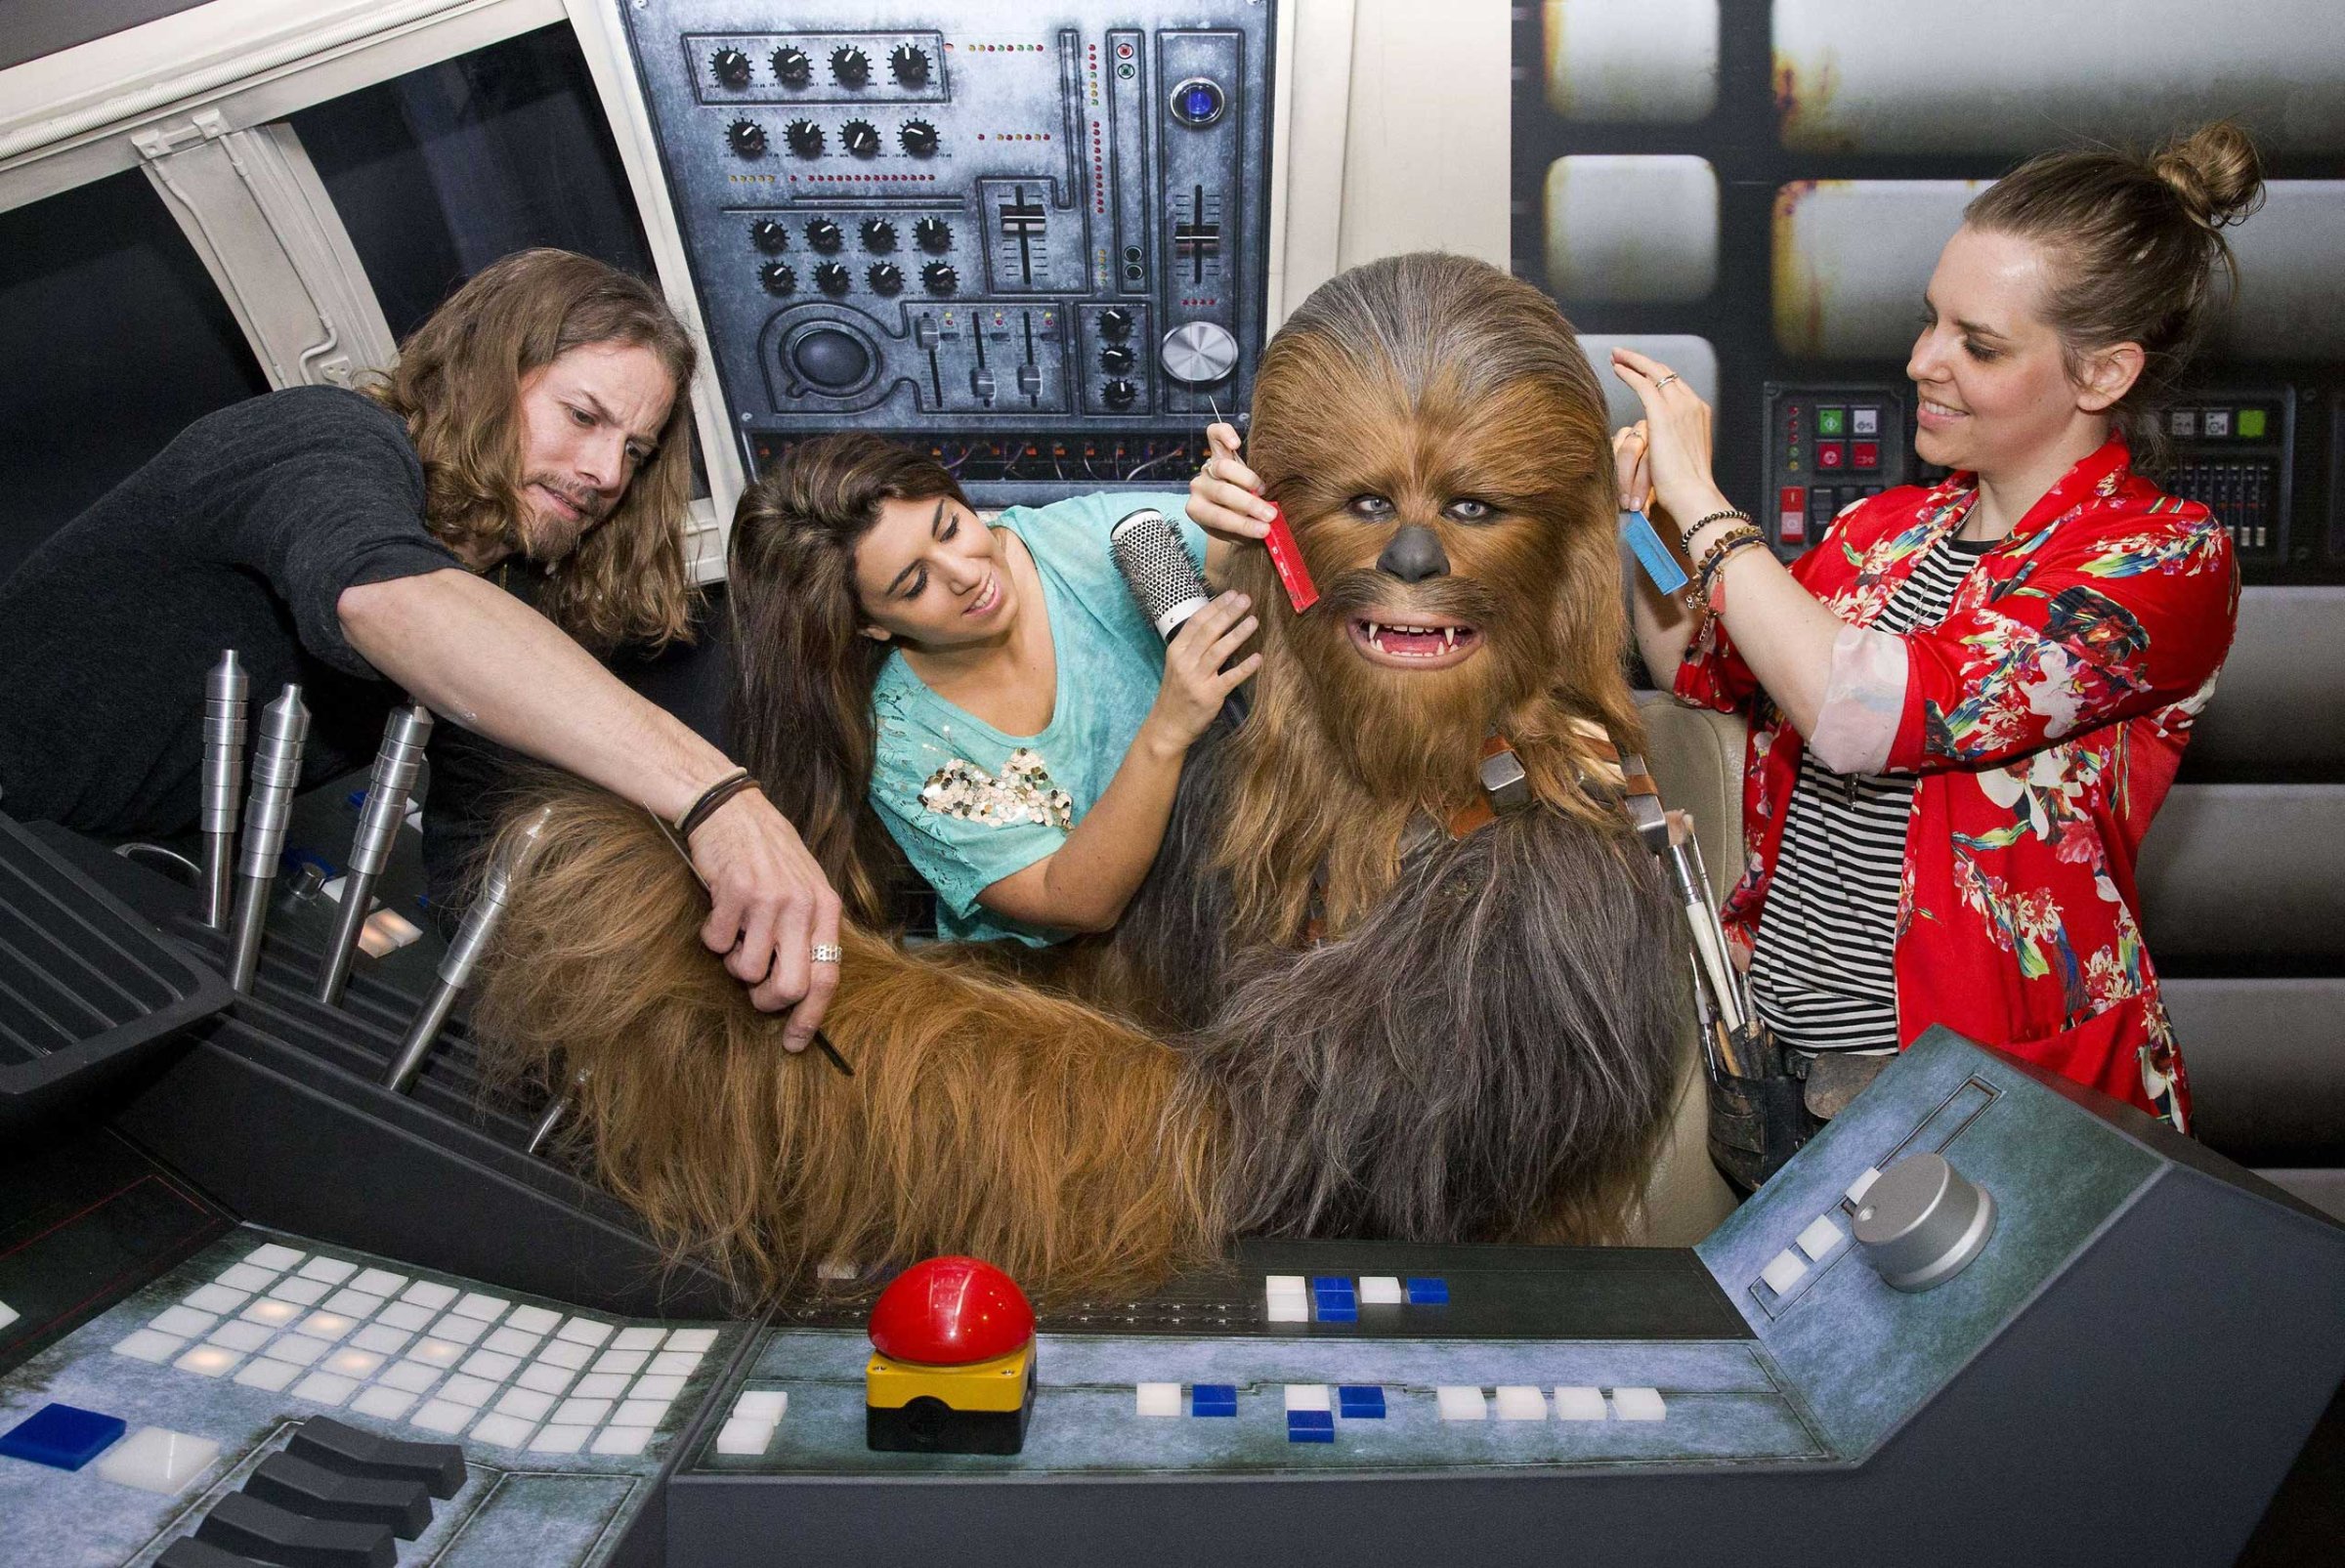 Members of staff put the finishing touches to the wax figure of Star Wars character Chewbacca at the Star Wars At Madame Tussauds attraction in London on May 12, 2015.